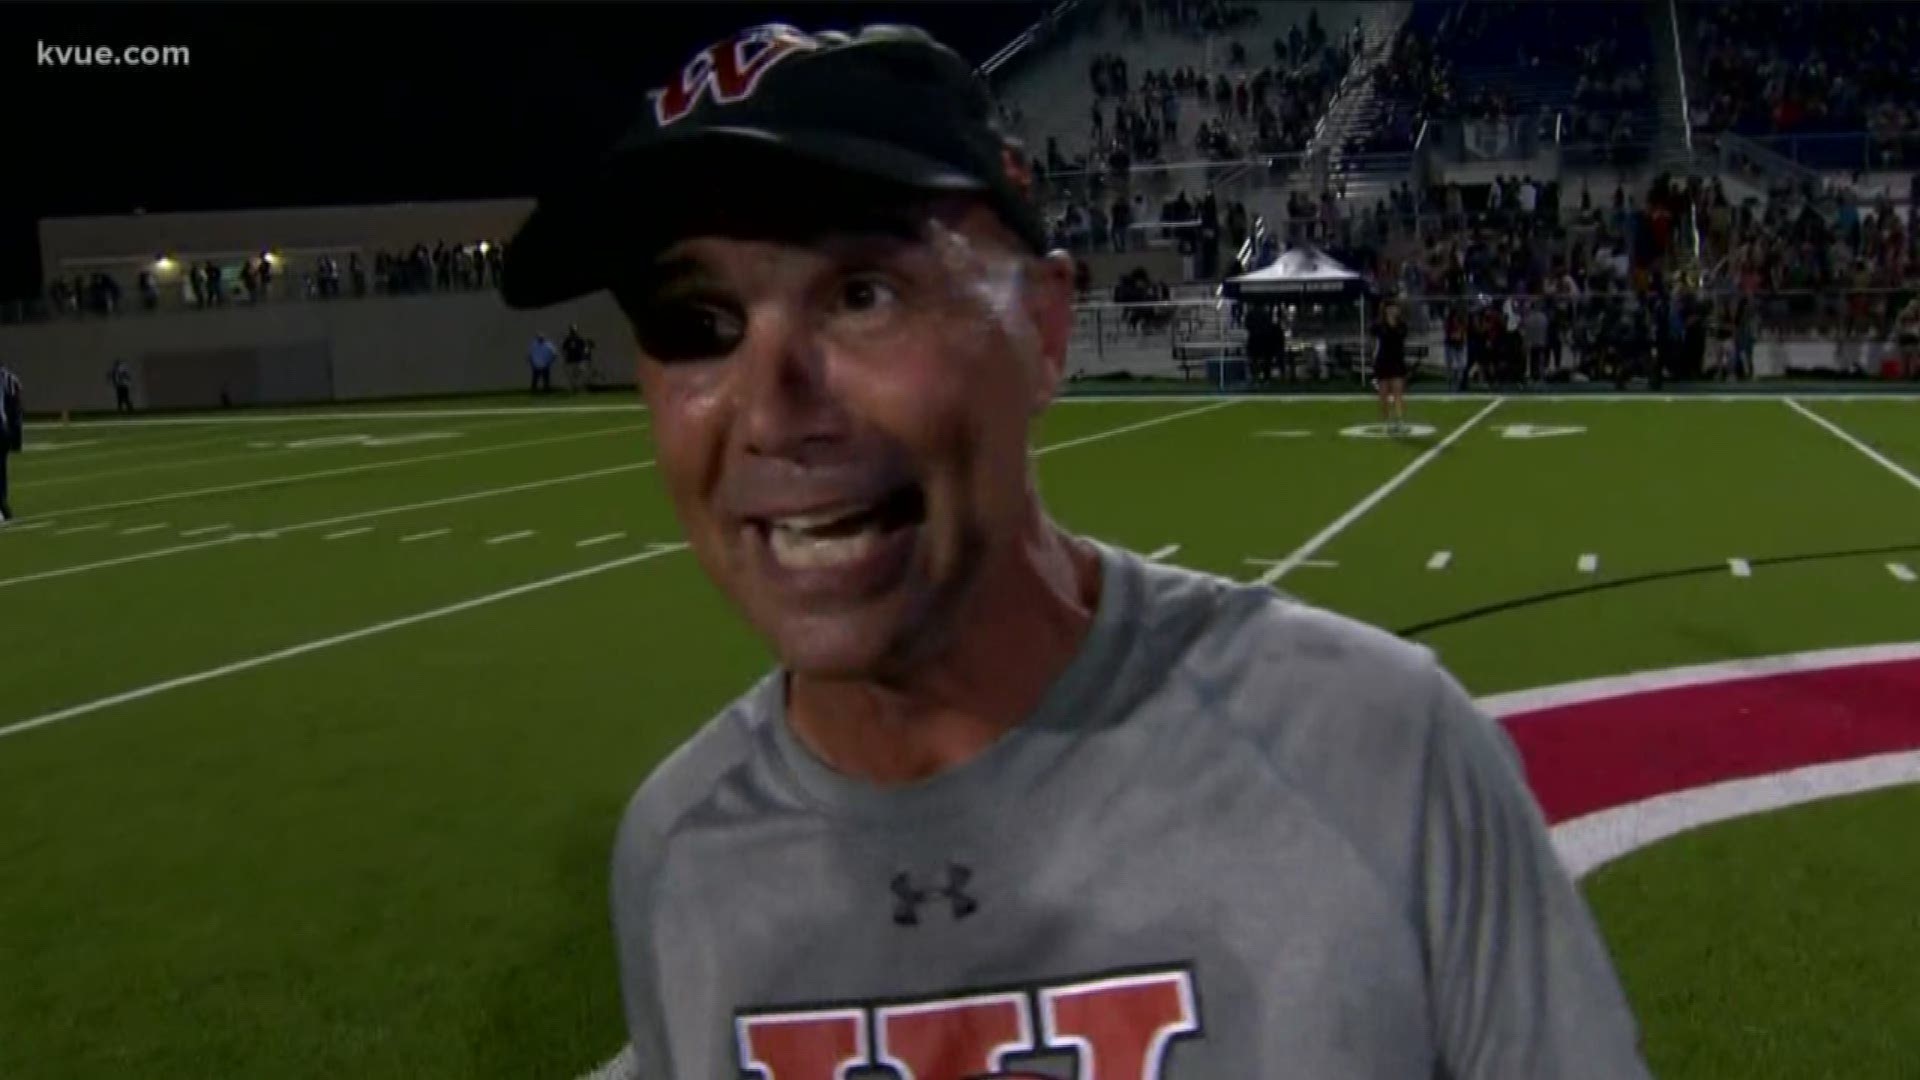 You'll want to see the Westwood High School coach's reaction after defeating Hendrickson by one due to a two-point conversion late in the game.